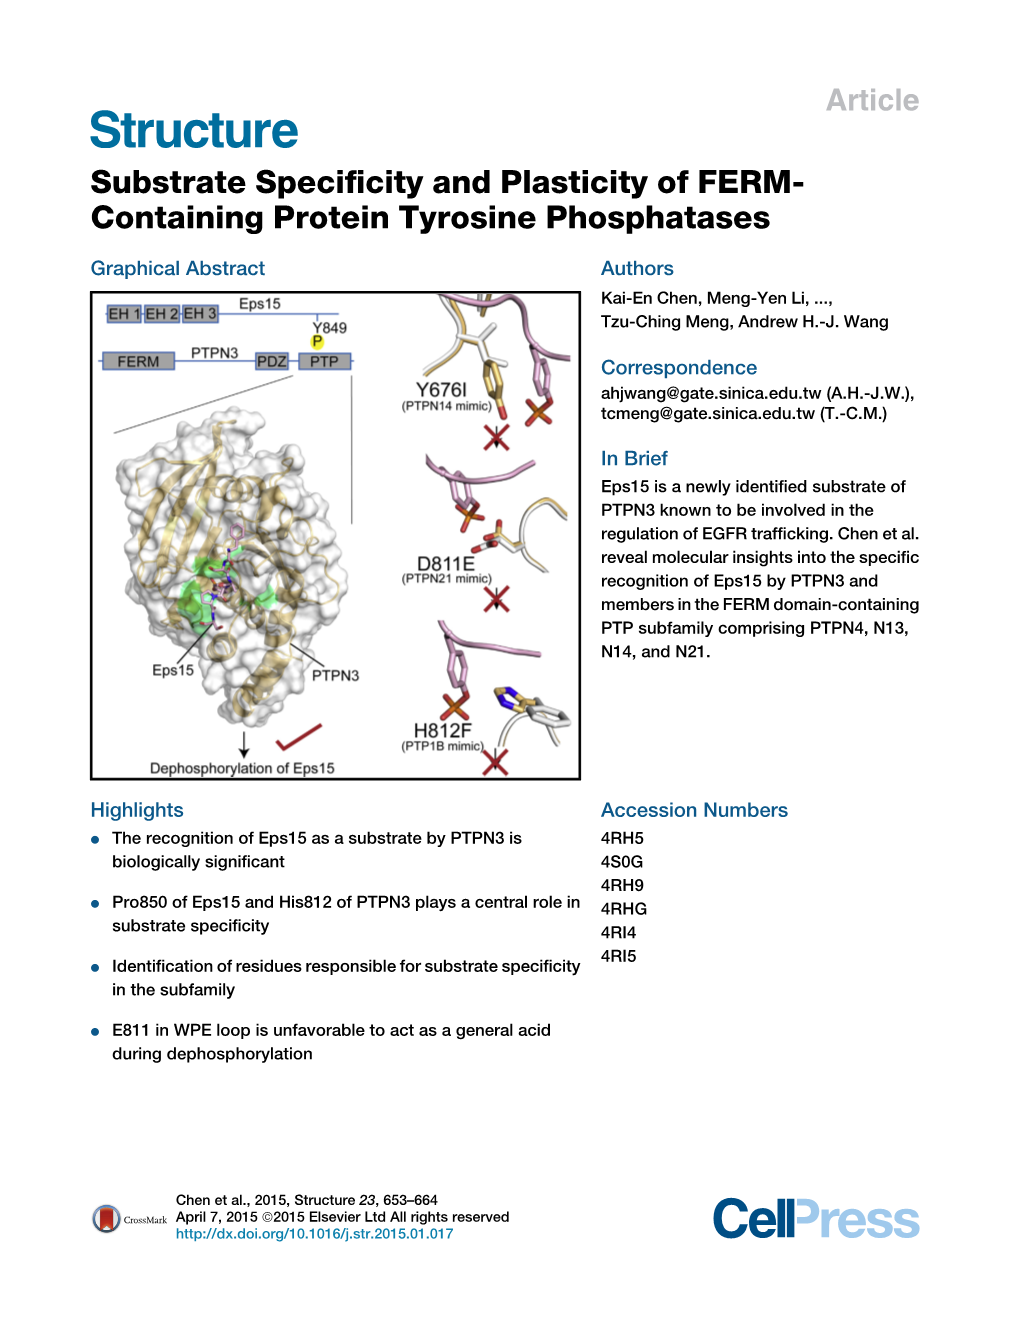 Substrate Specificity and Plasticity of FERM-Containing Protein Tyrosine